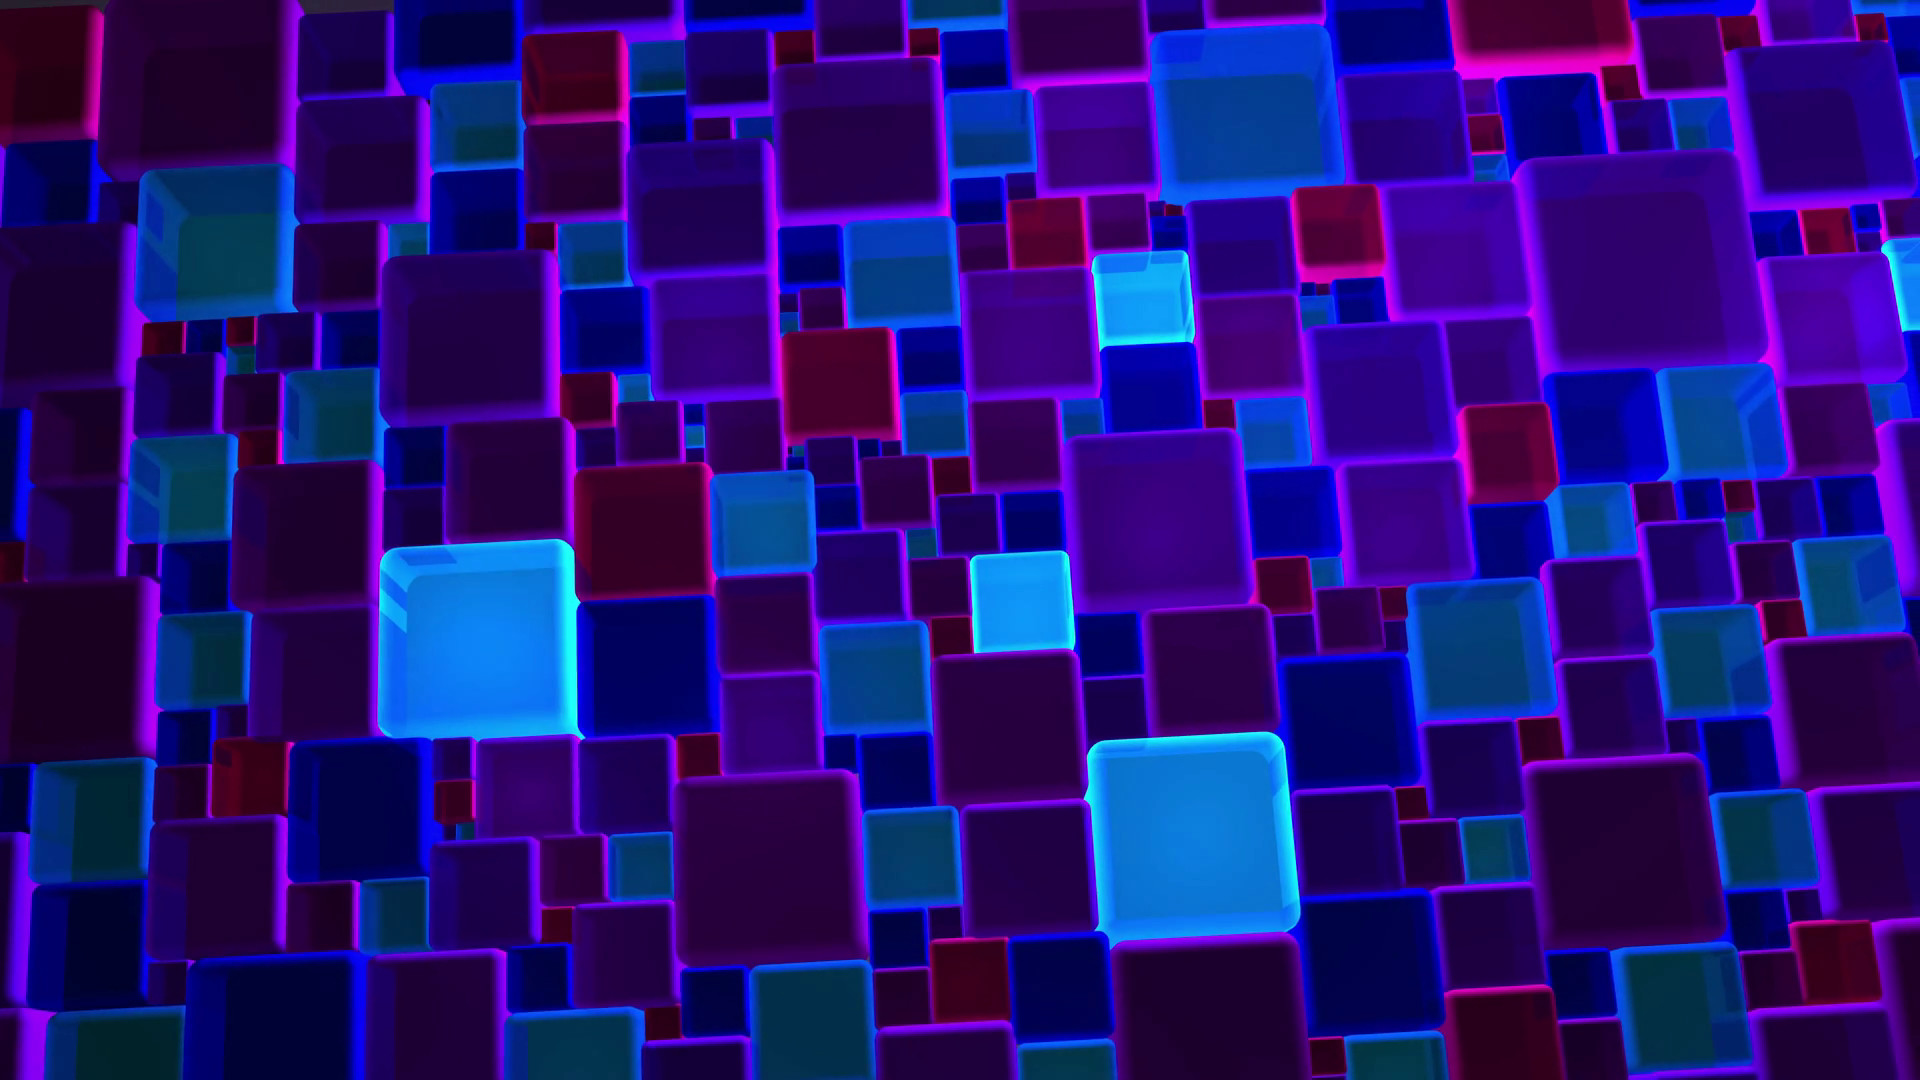 1920x1080 Subscription Library Neon Blue And Violet Lights Cubes Background In 4k